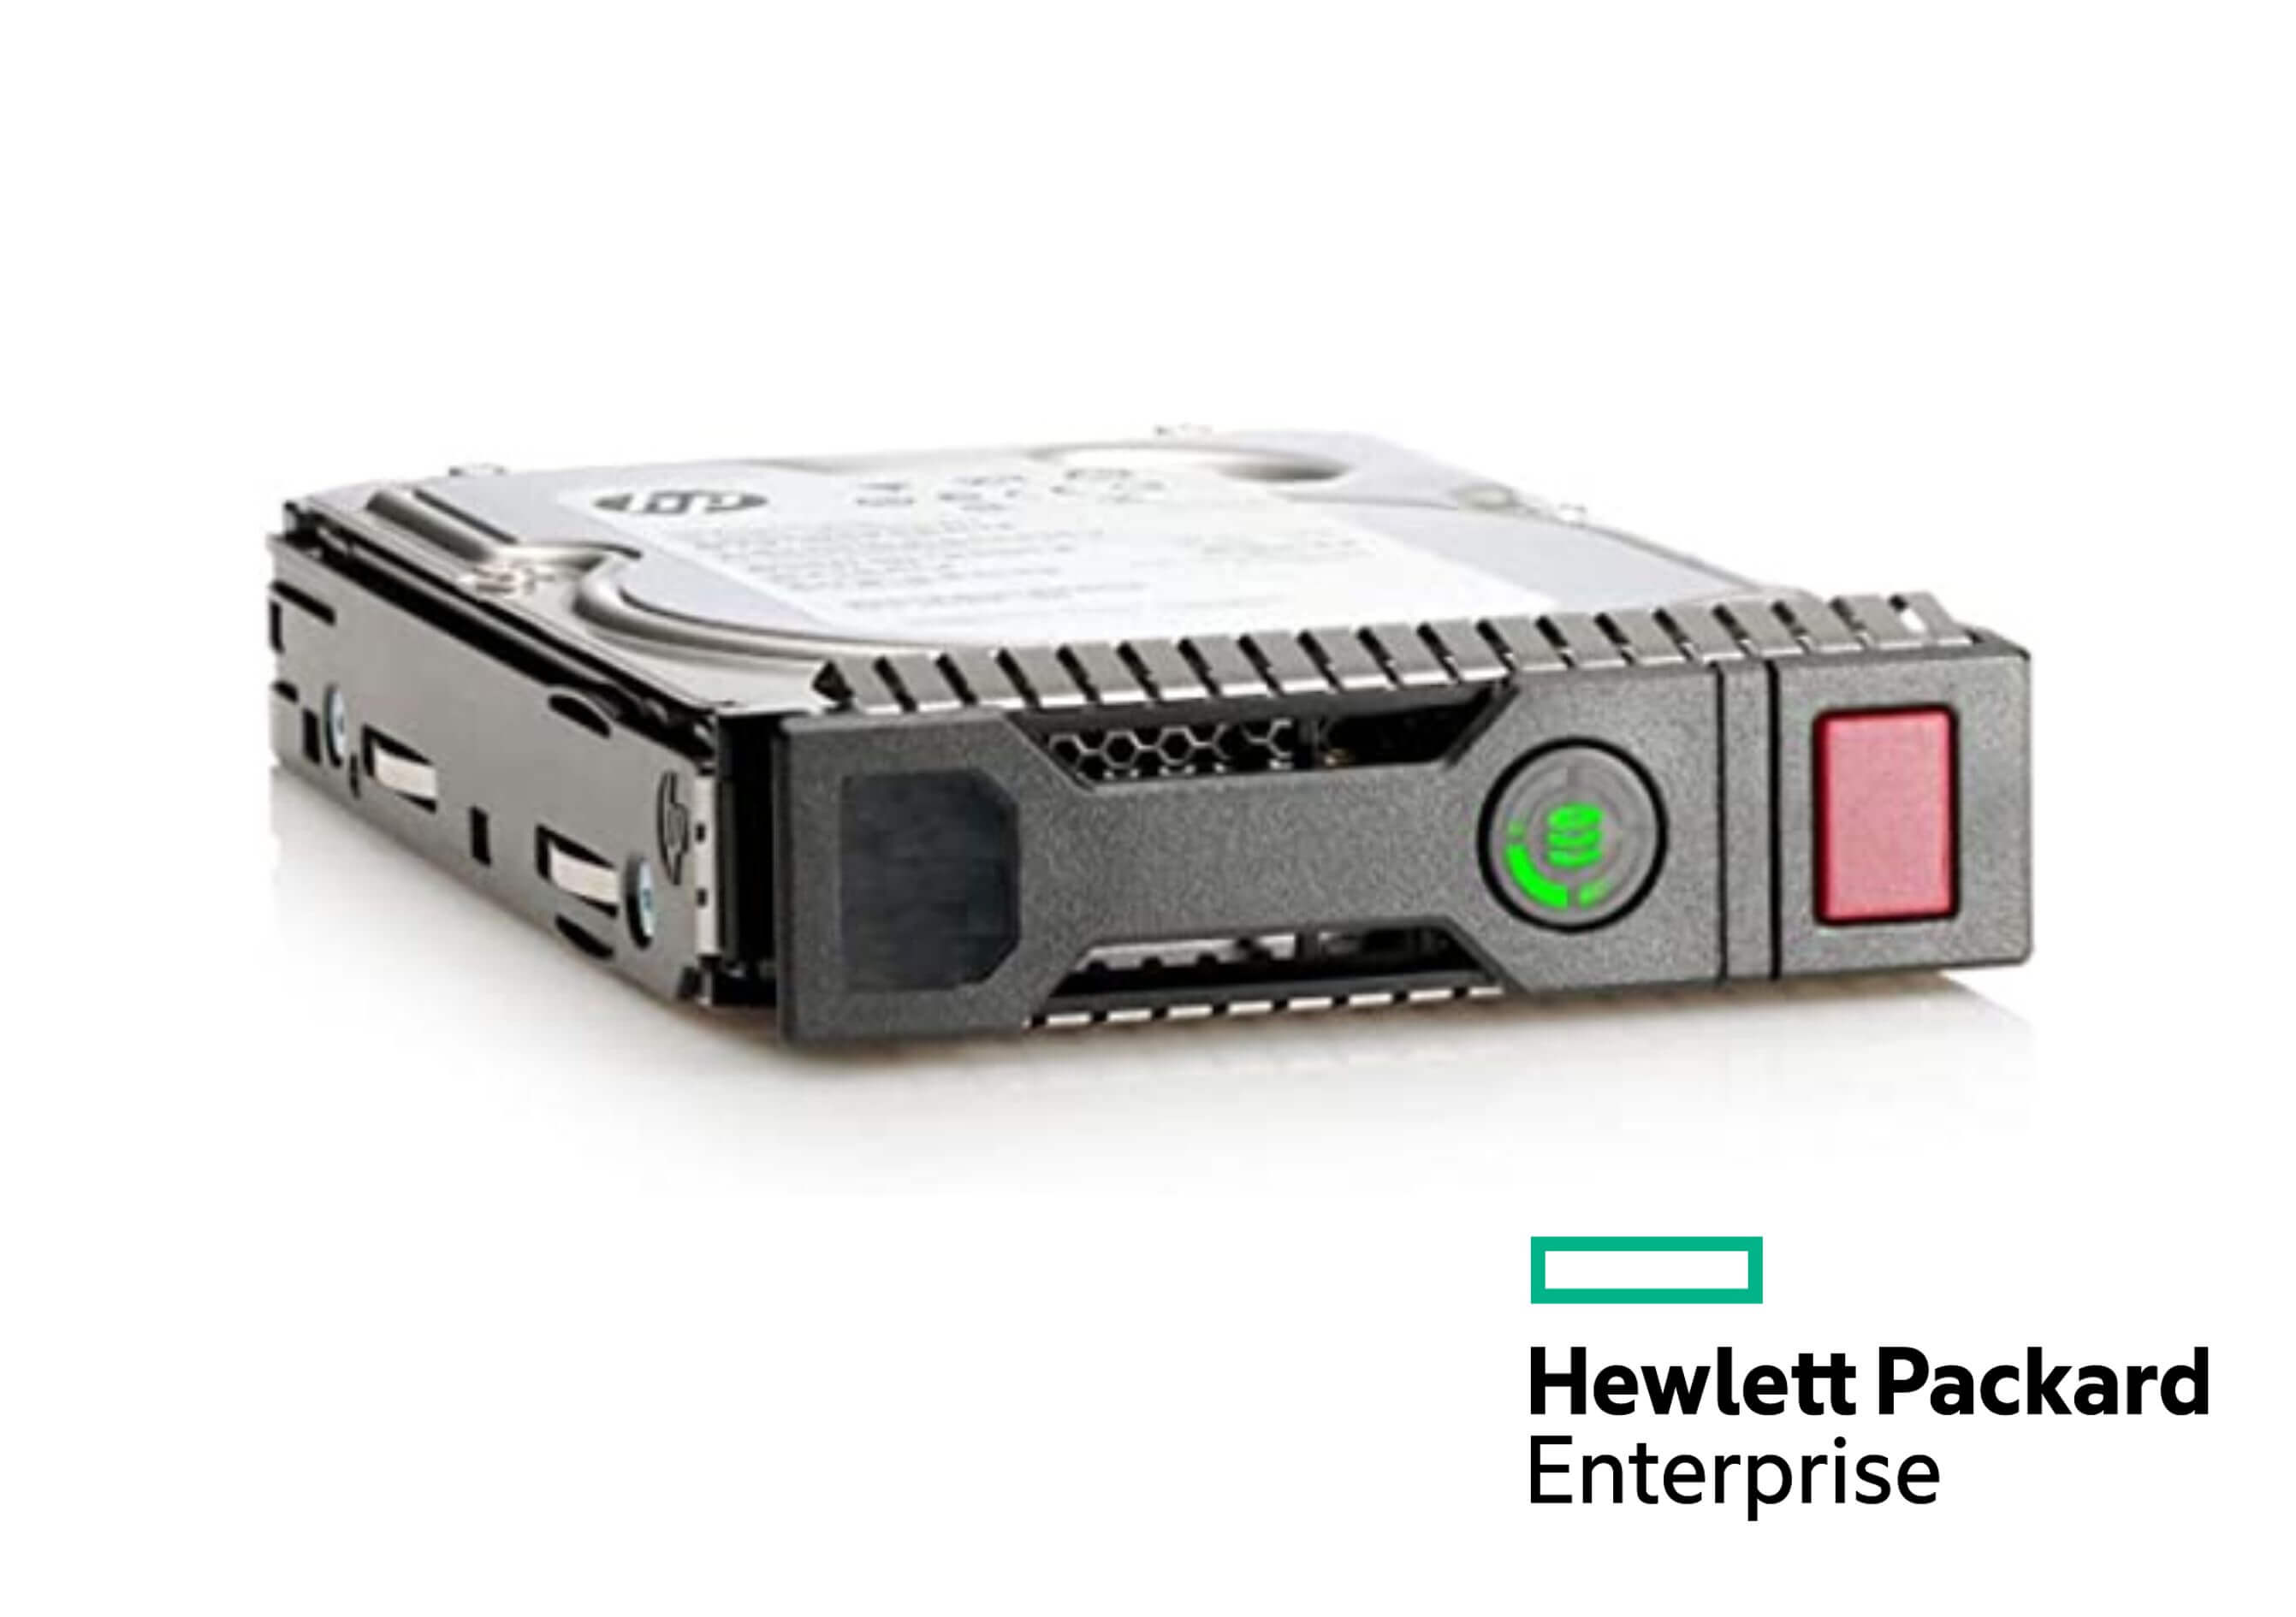 HPE Part 846625-001 HPE 1.6TB hot-plug Solid State Drive (SSD) - SAS interface, Mixed Use-1 (MU), 12Gb/sec transfer rate, 2.5-inch small form factor (SFF), smart carrier (SC), power loss protection (PLP) - For use with Gen8 servers and beyond <br/><b>Option equivalent: 846436-B21</b>